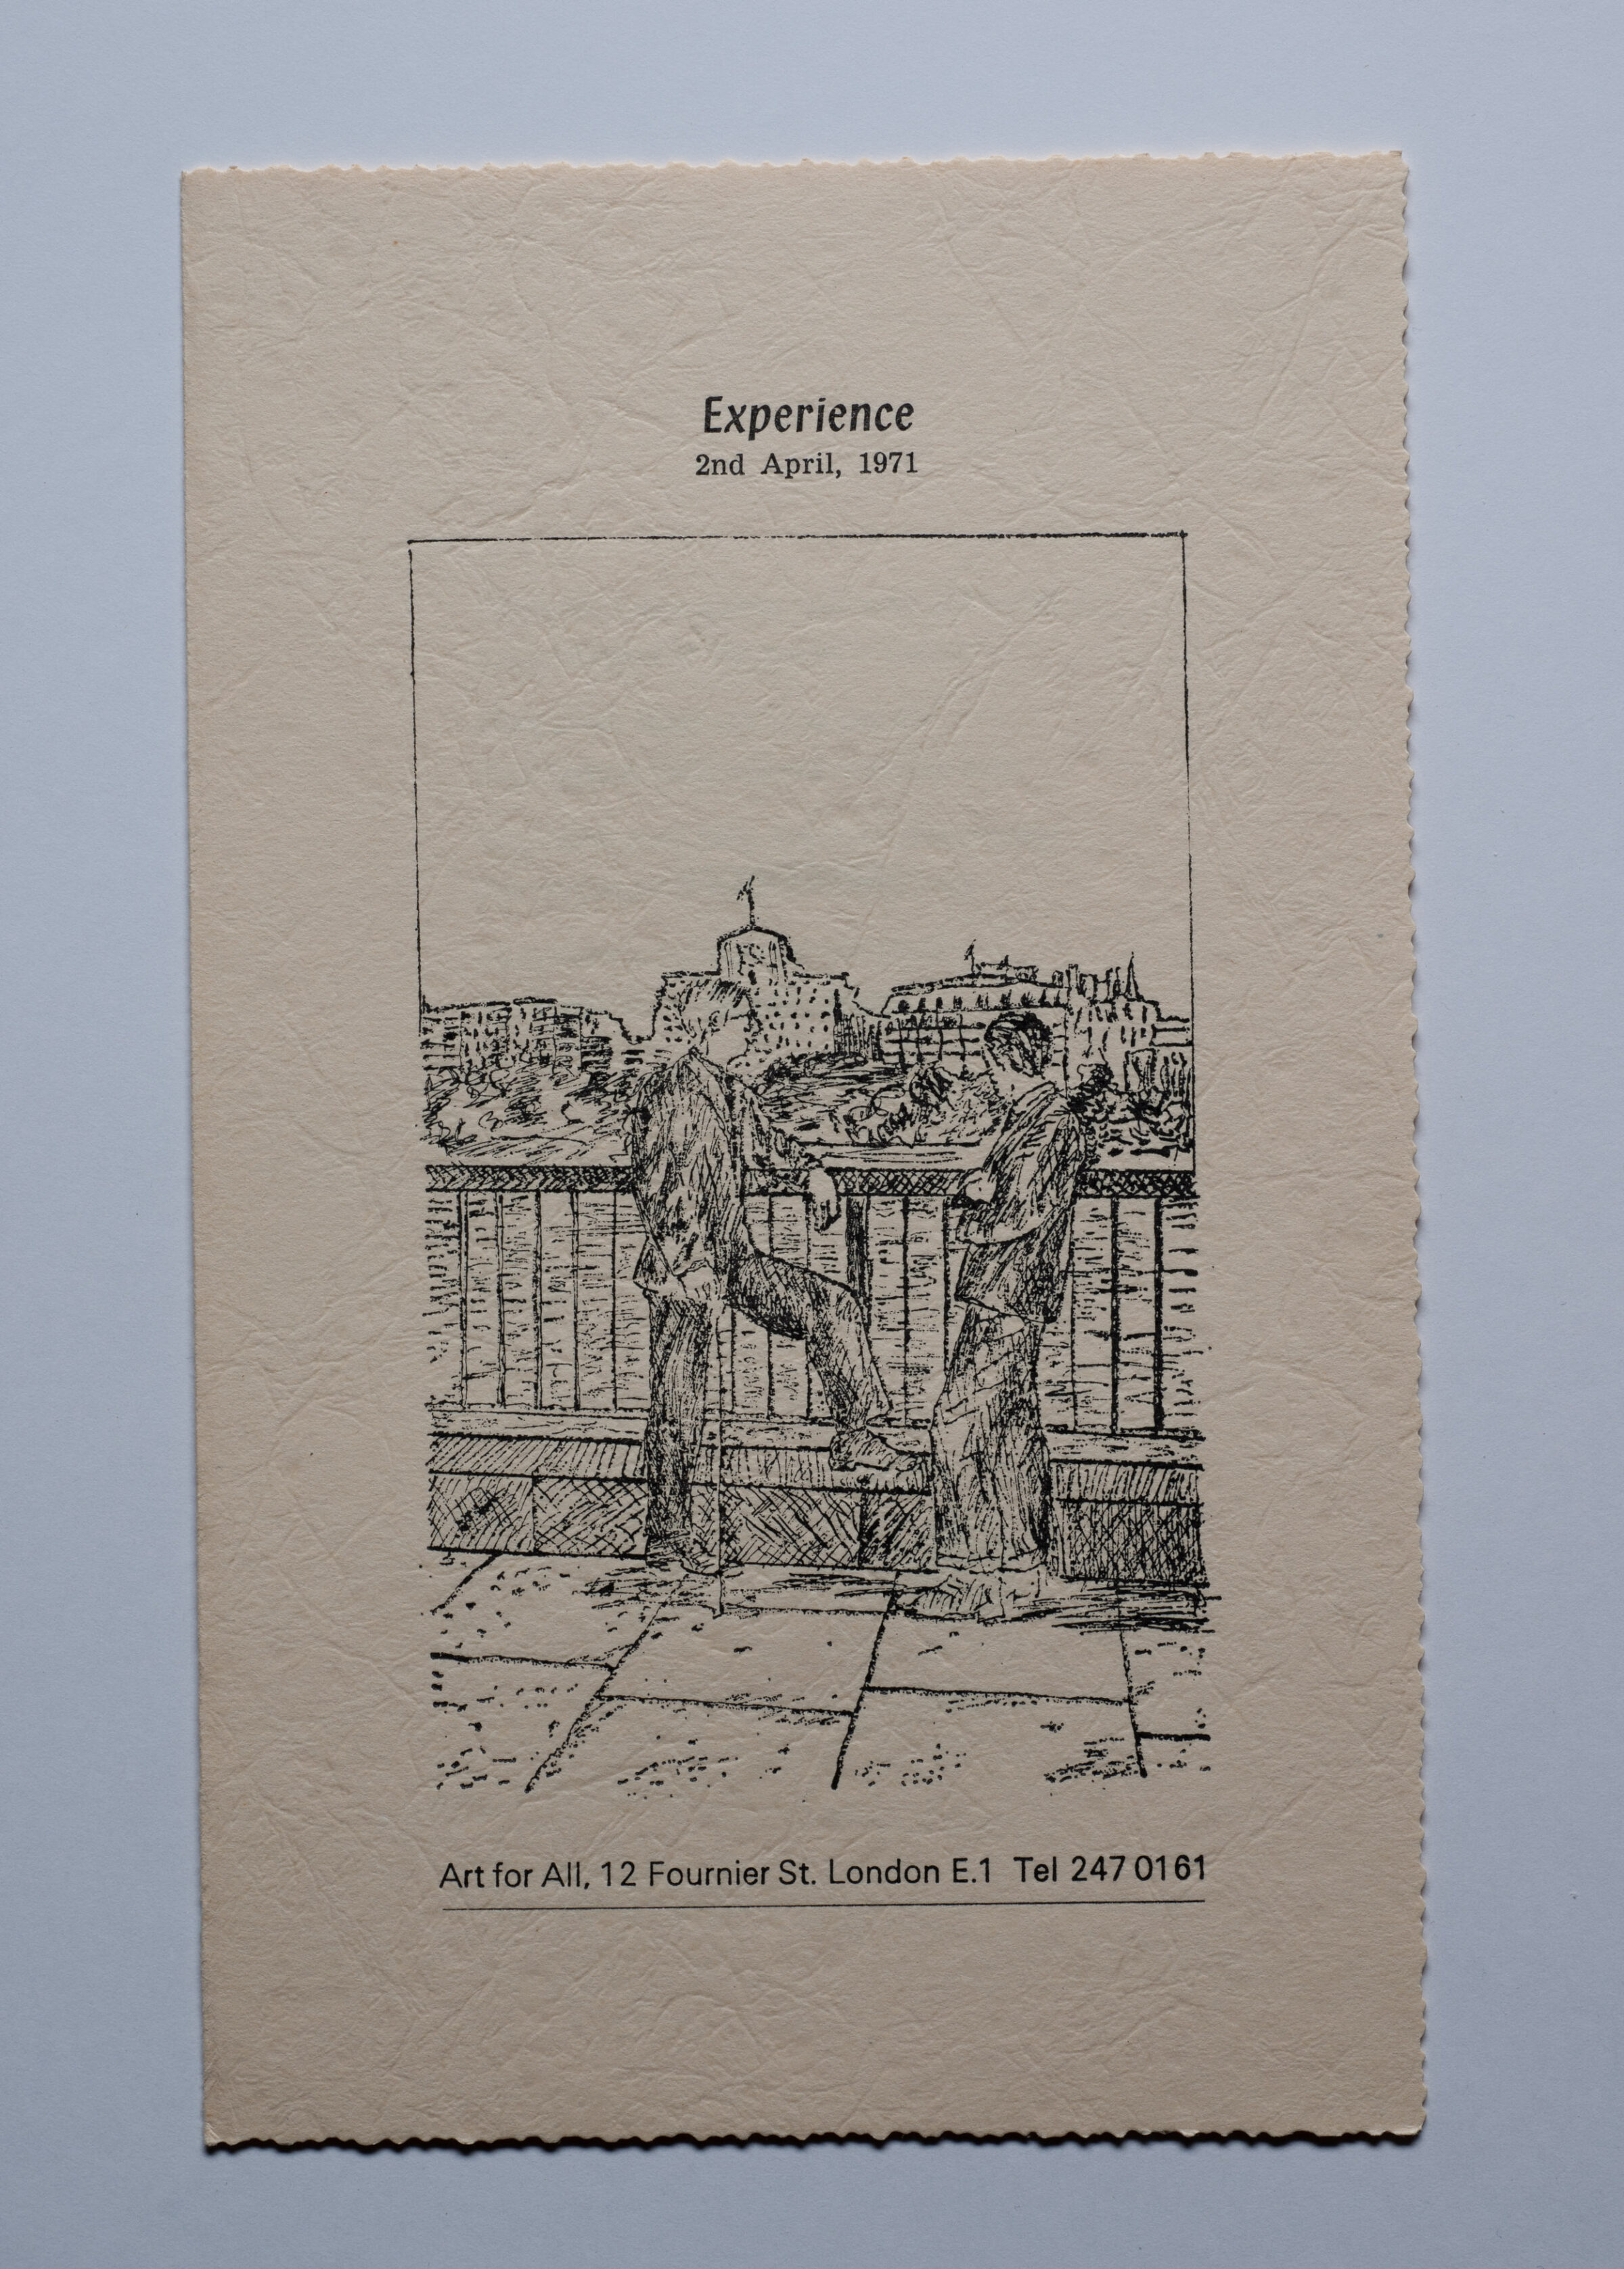 1971 3 EXPERIENCE cover